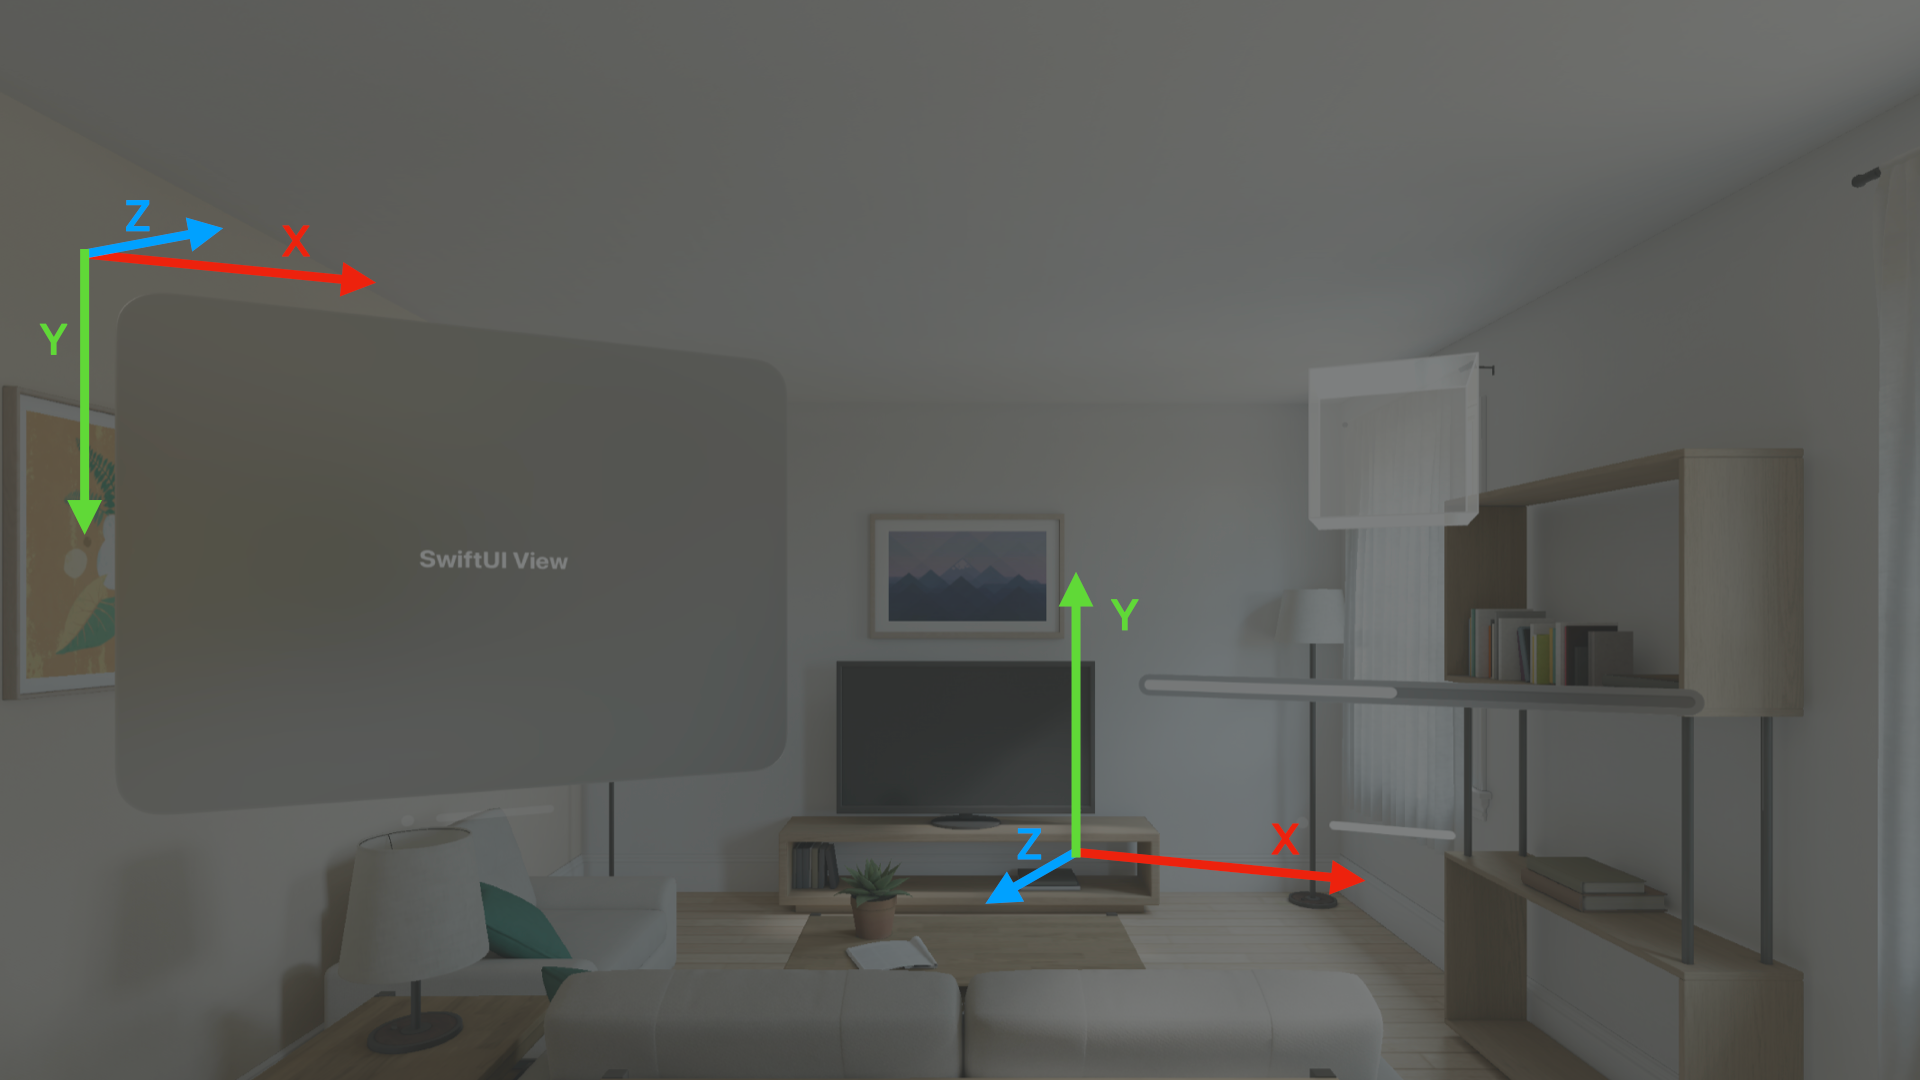 A screenshot from the Apple Vision Pro simulator displaying a 3D-rendered living room with overlaid X, Y, and Z coordinate axes in red, green, and blue respectively.